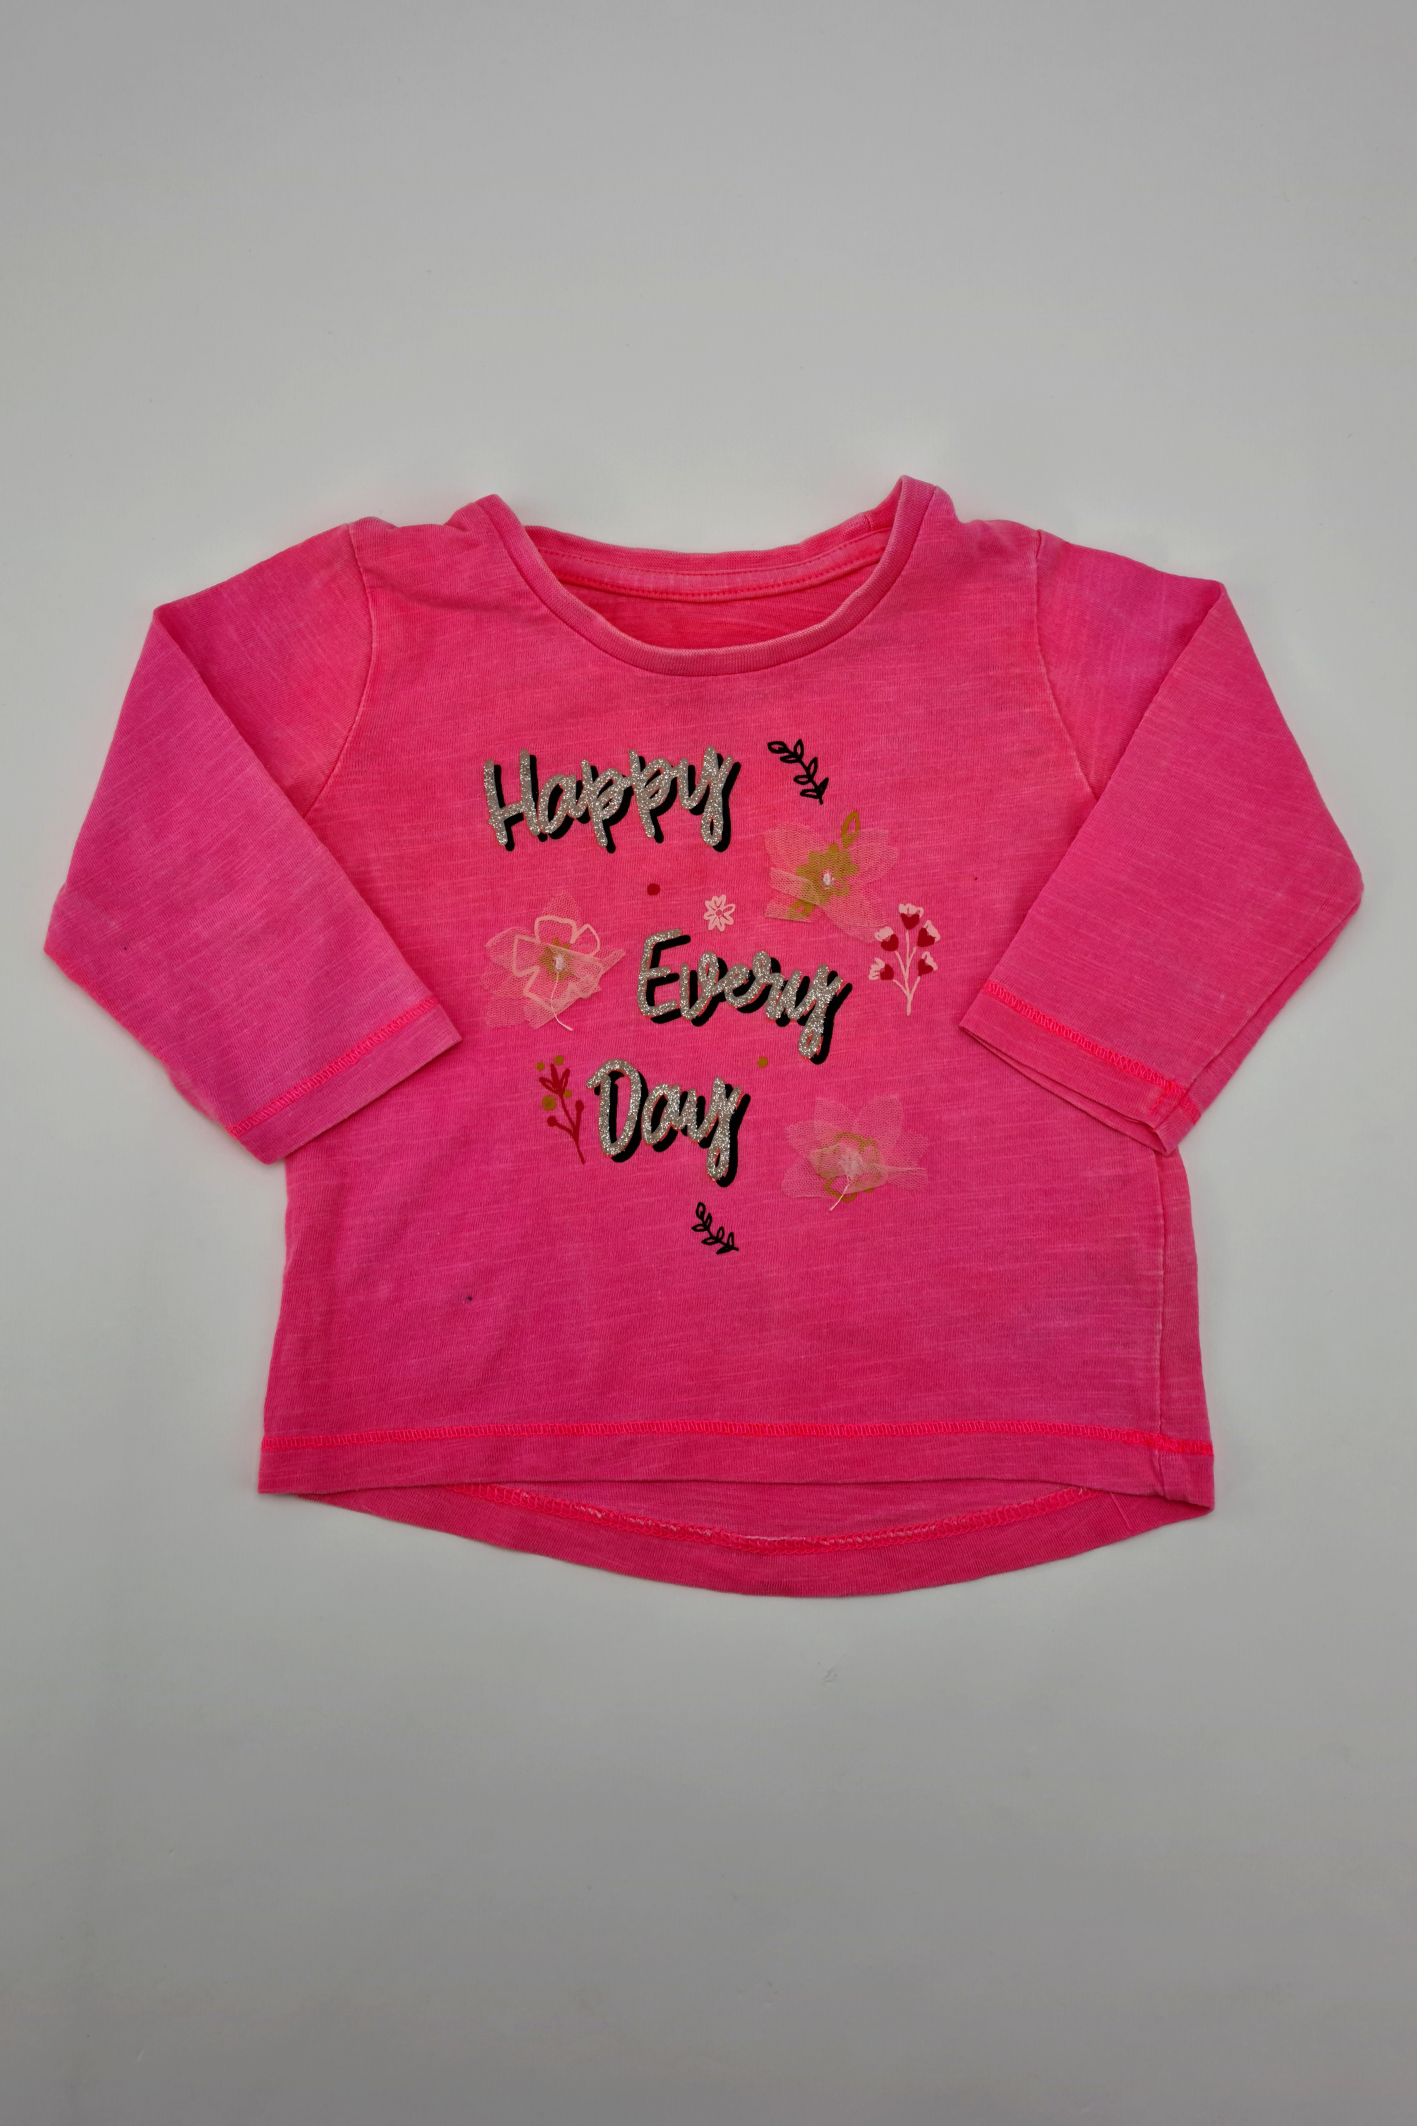 9-12m - 'Happy Every Day' T-shirt